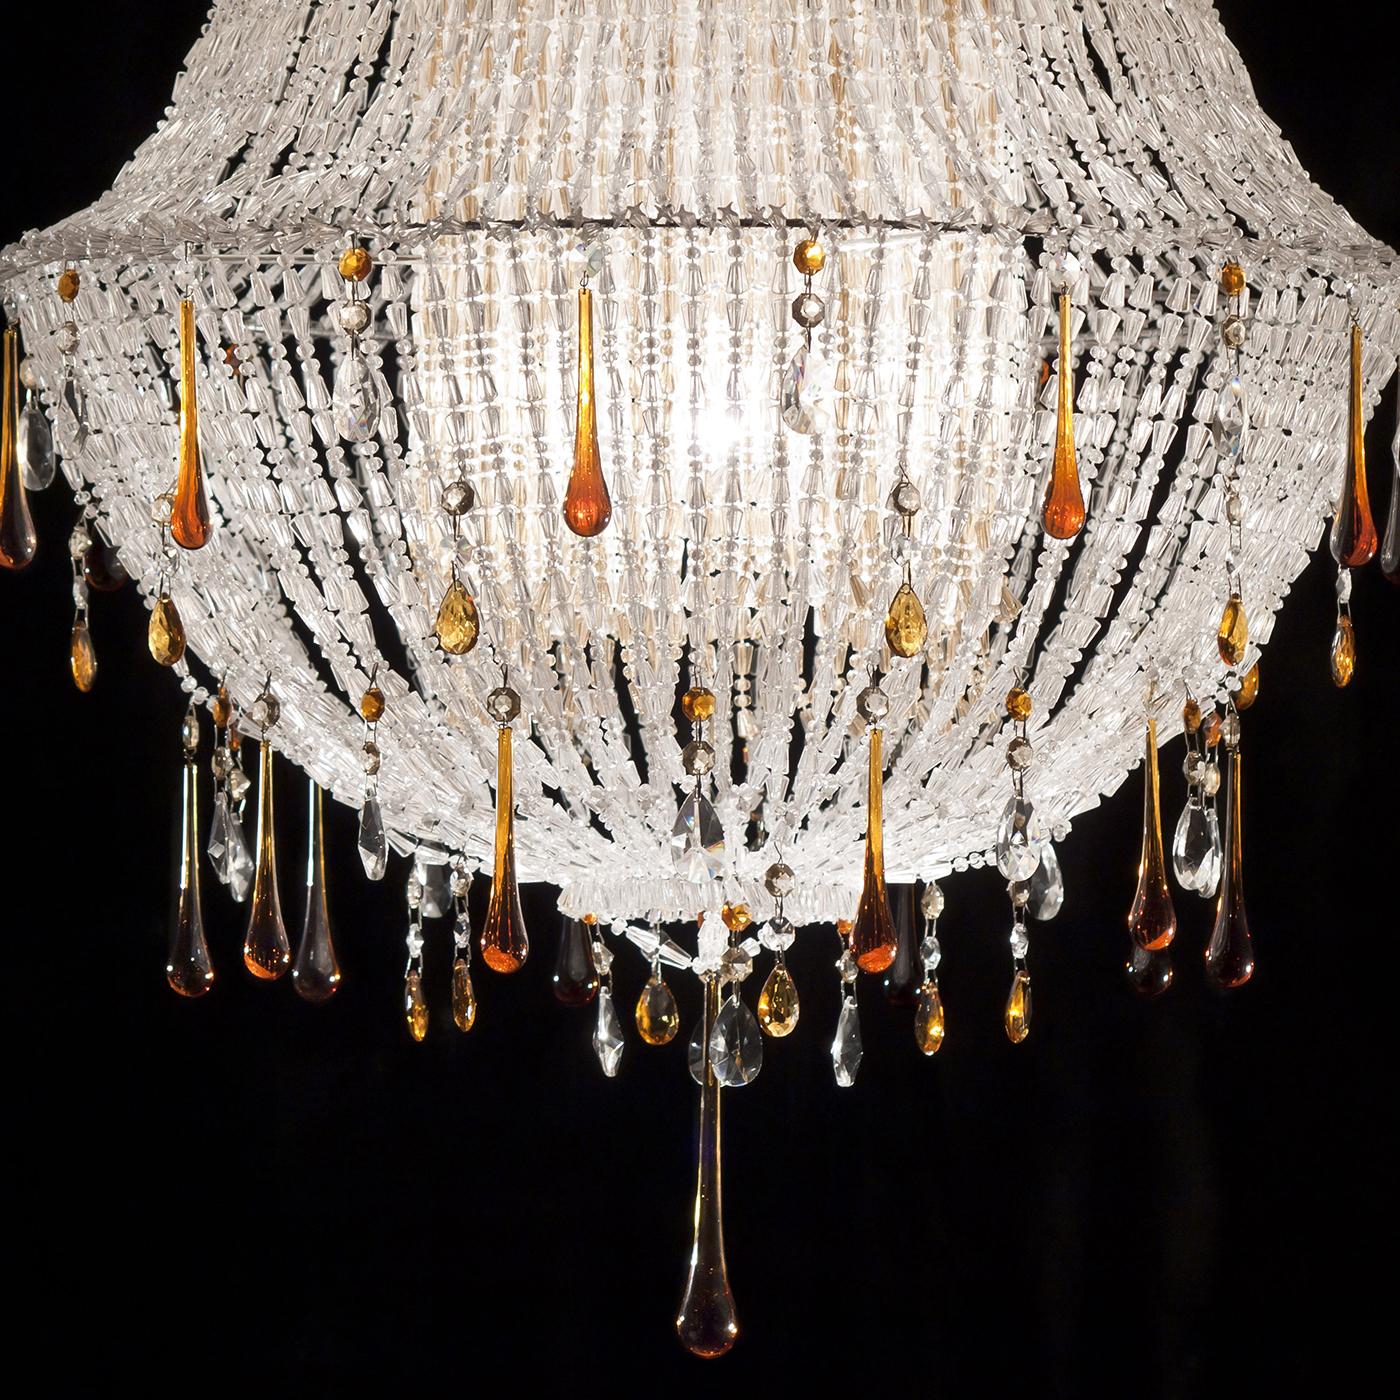 Marked by a flared silhouette, this pendant lamp owes its outstanding charm to the reflecting power of its components, all meticulously hand-tied. Strands made up of transparent acrylic beads mix with amber, teardrop-like crystal, and glass